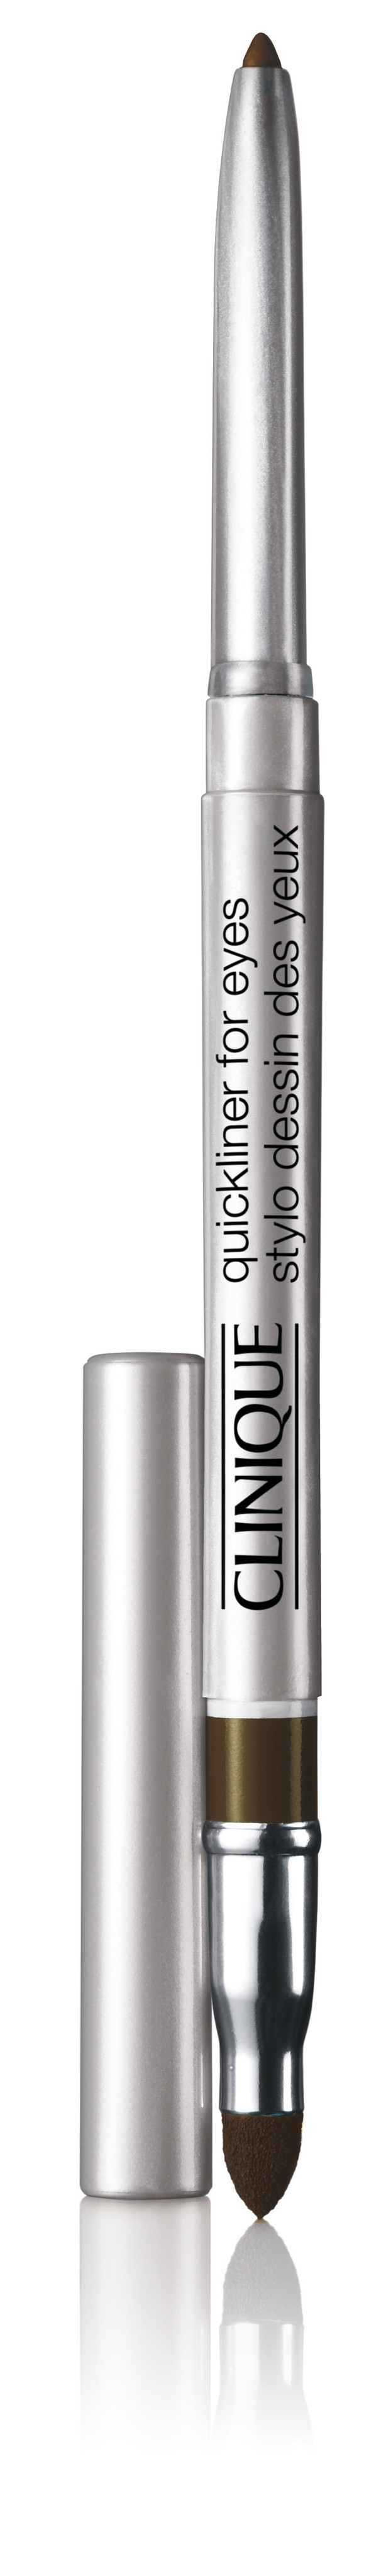 Clinique quickliner for eyes - 03 roast coffee, 03 ROAST COFFEE, large